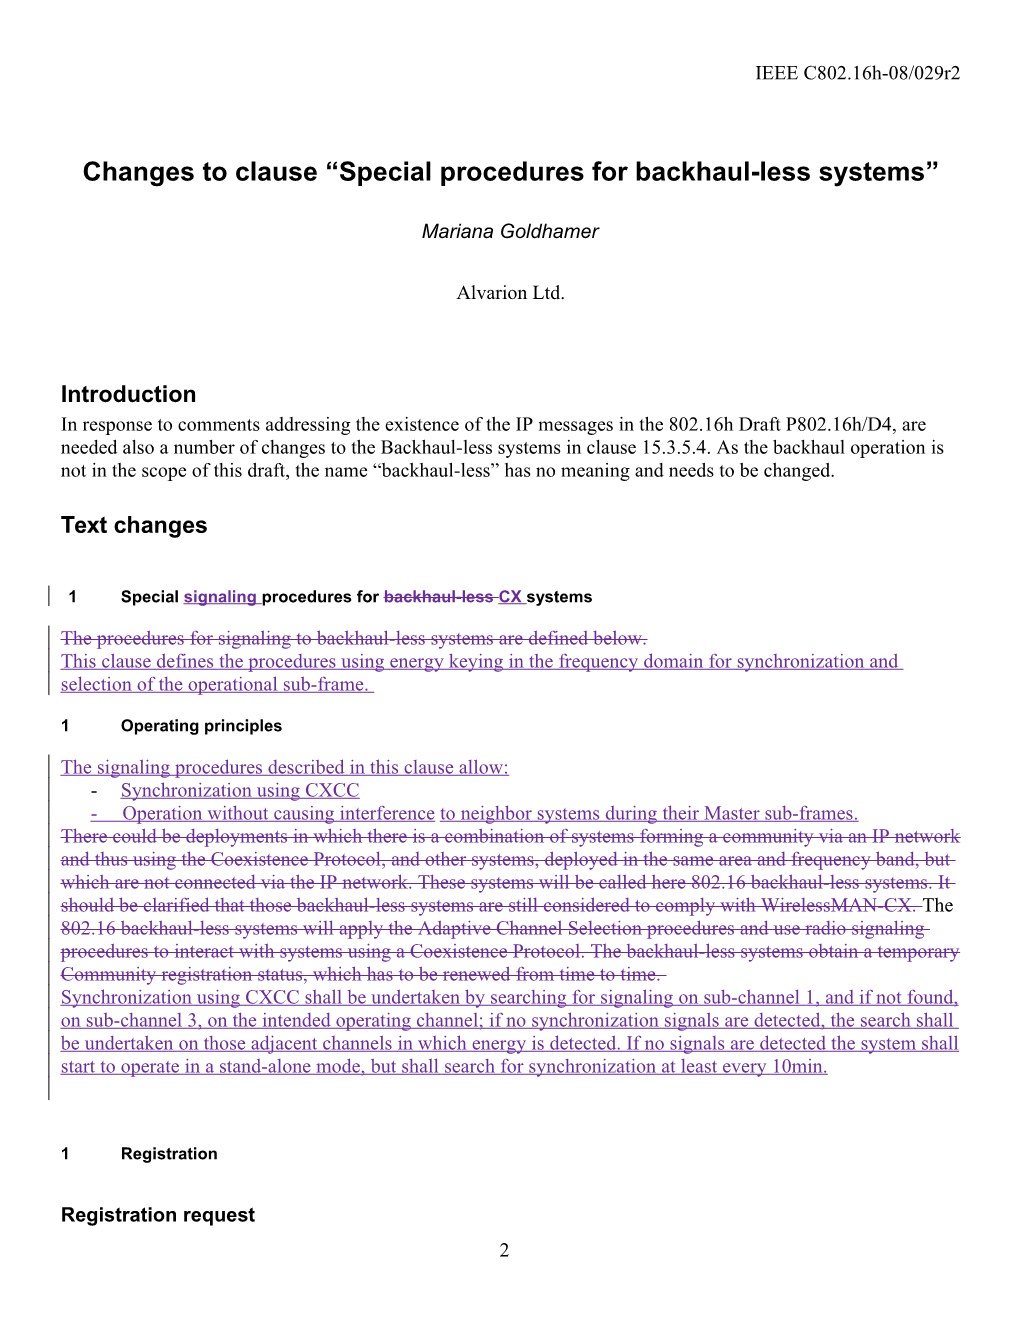 Changes to Clause Special Procedures for Backhaul-Less Systems